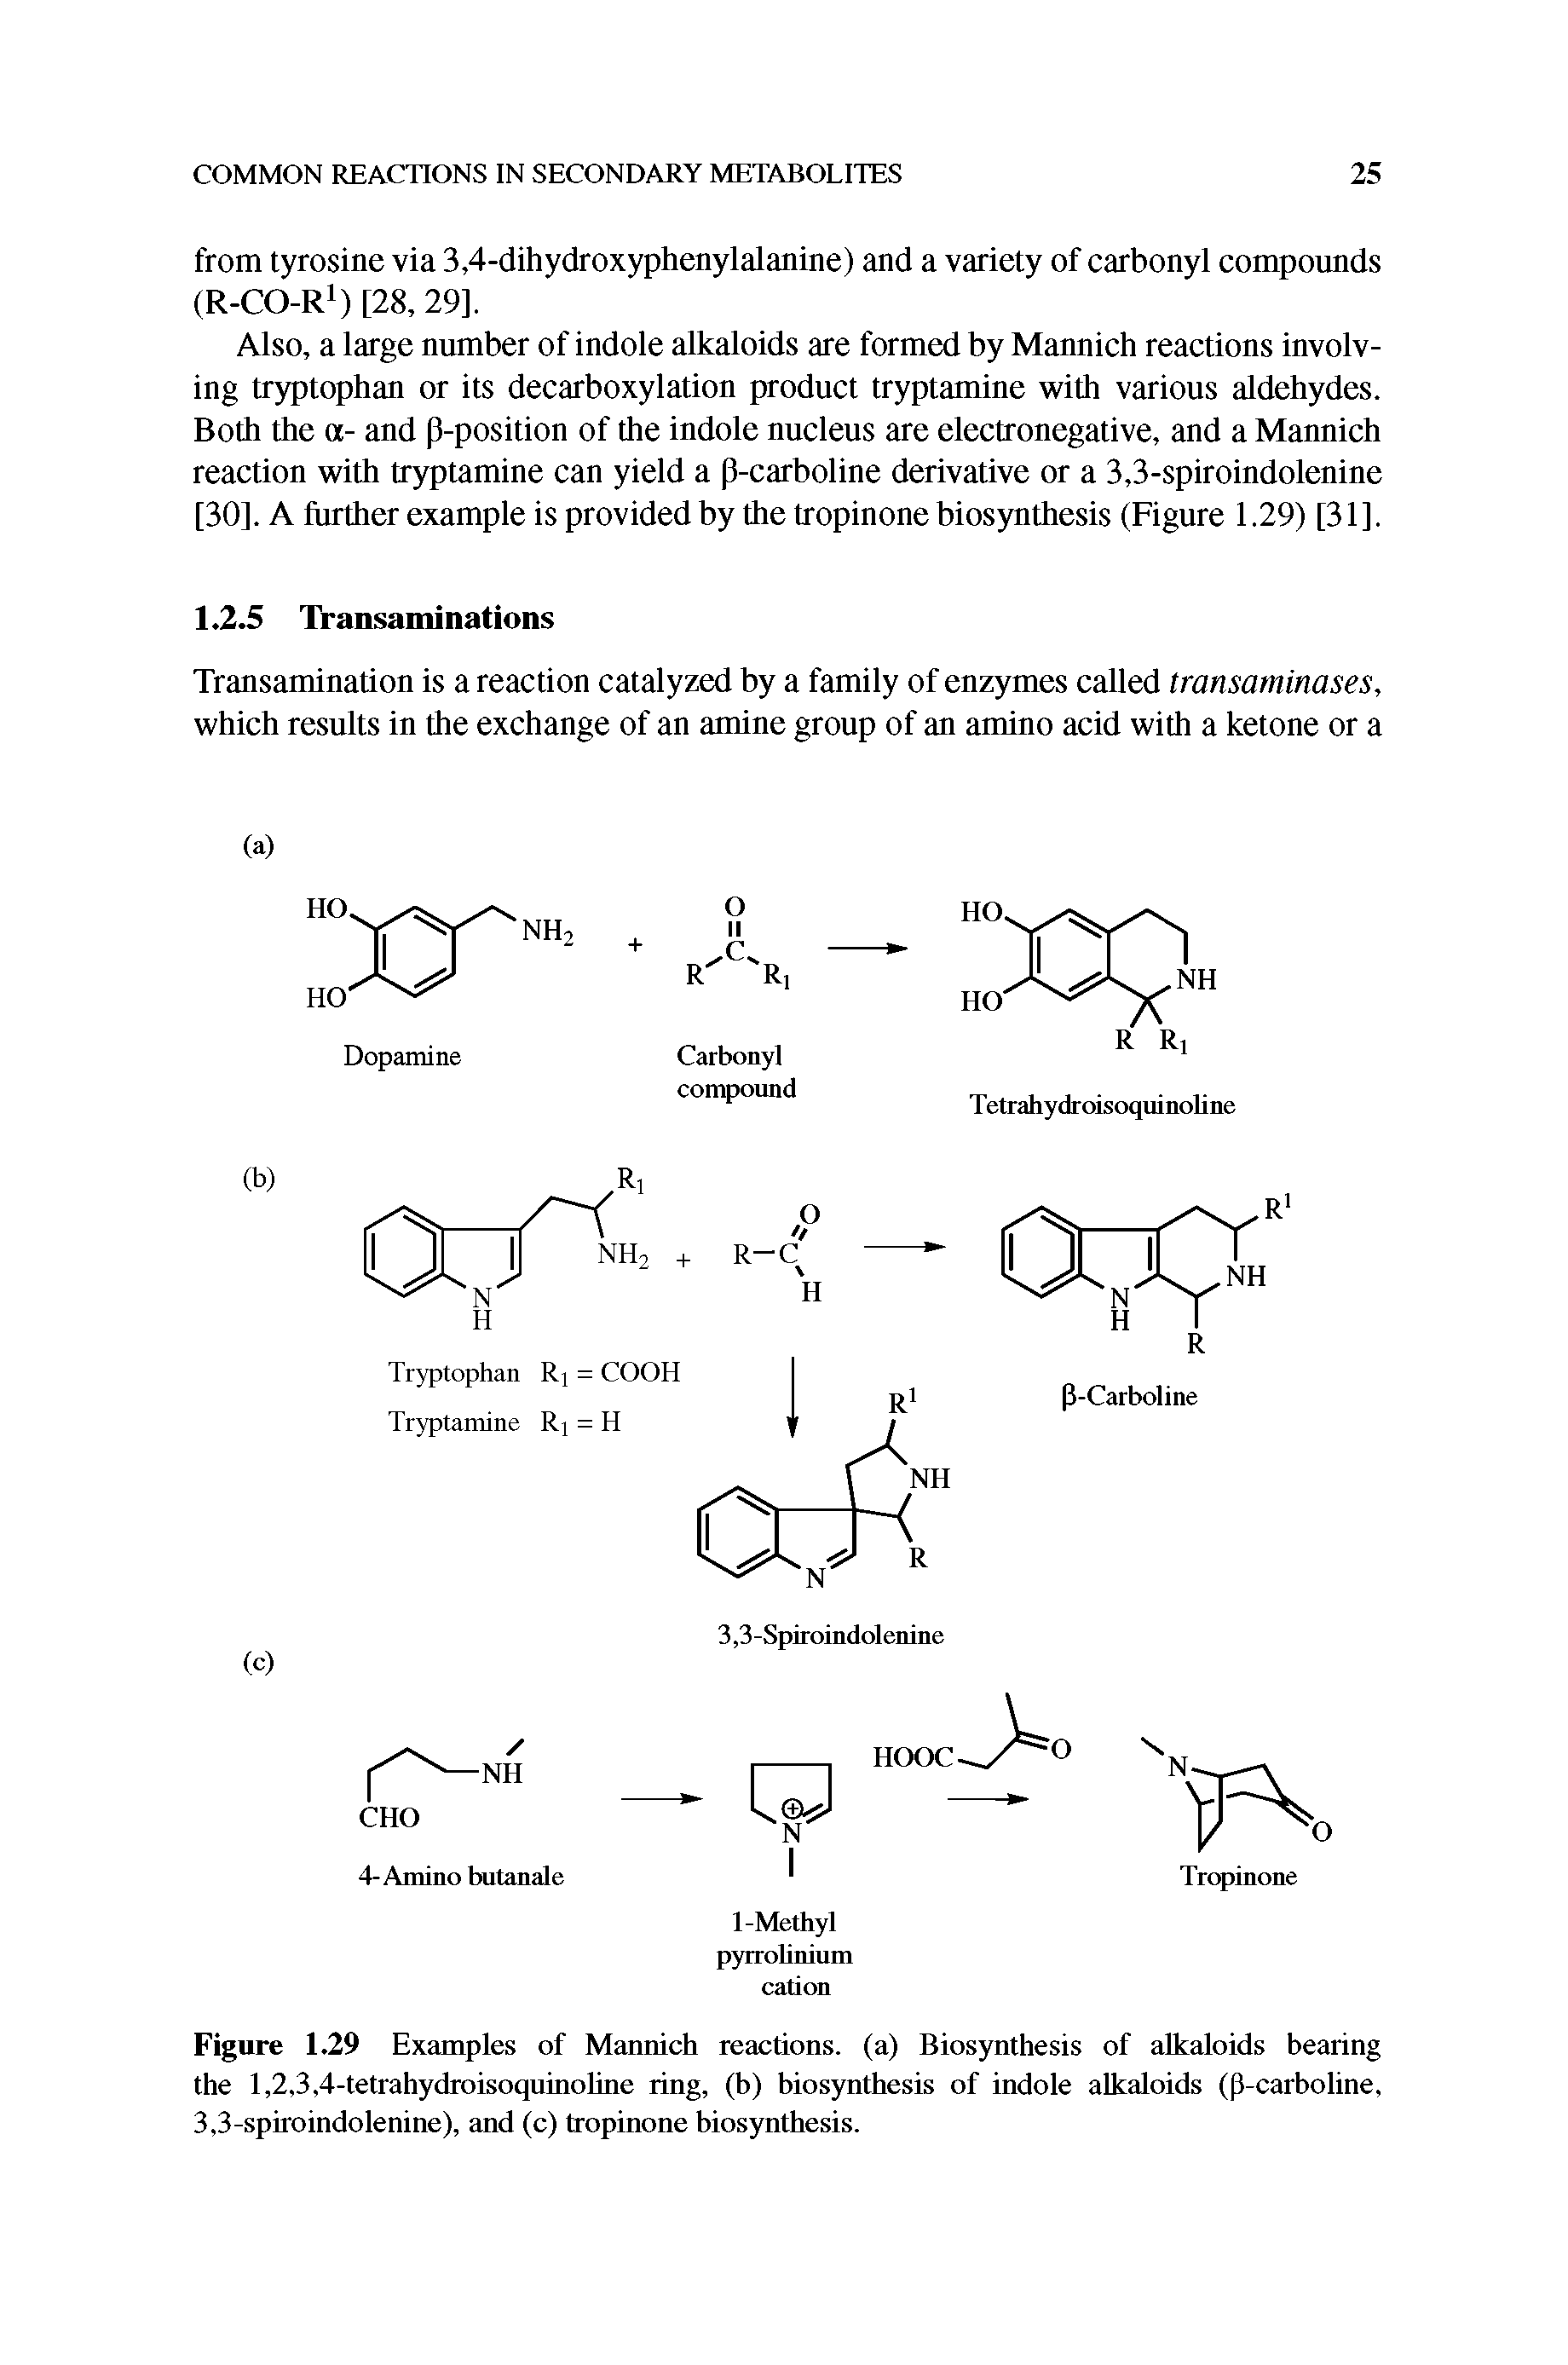 Figure 1.29 Examples of Mannich reactions, (a) Biosynthesis of alkaloids bearing the 1,2,3,4-tetrahydroisoqumoline ring, (h) biosynthesis of indole alkaloids (P-carboline, 3,3-spiroindolenine), and (c) tropinone biosynthesis.